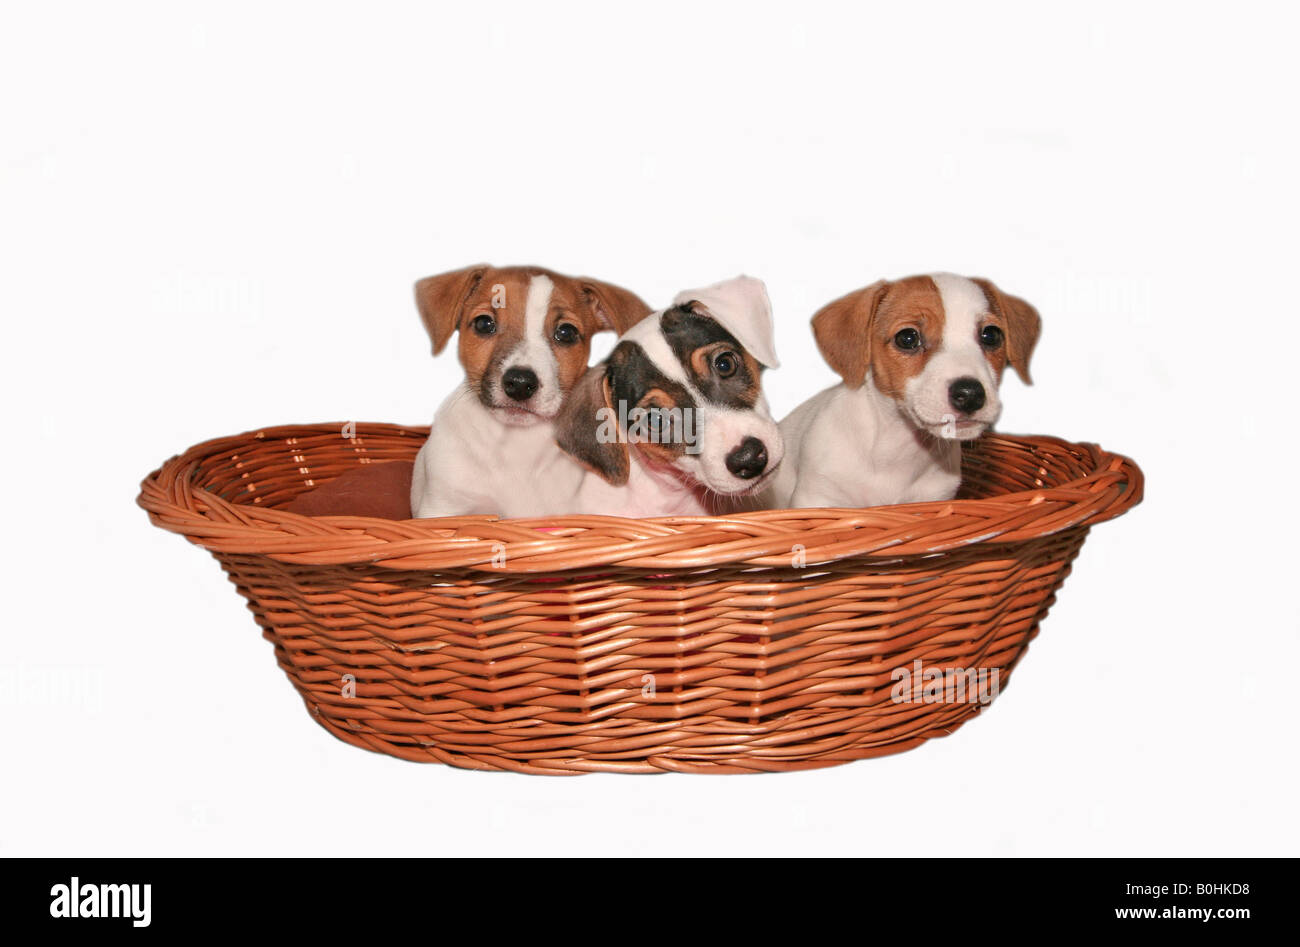 Jack Russell puppies Stock Photo